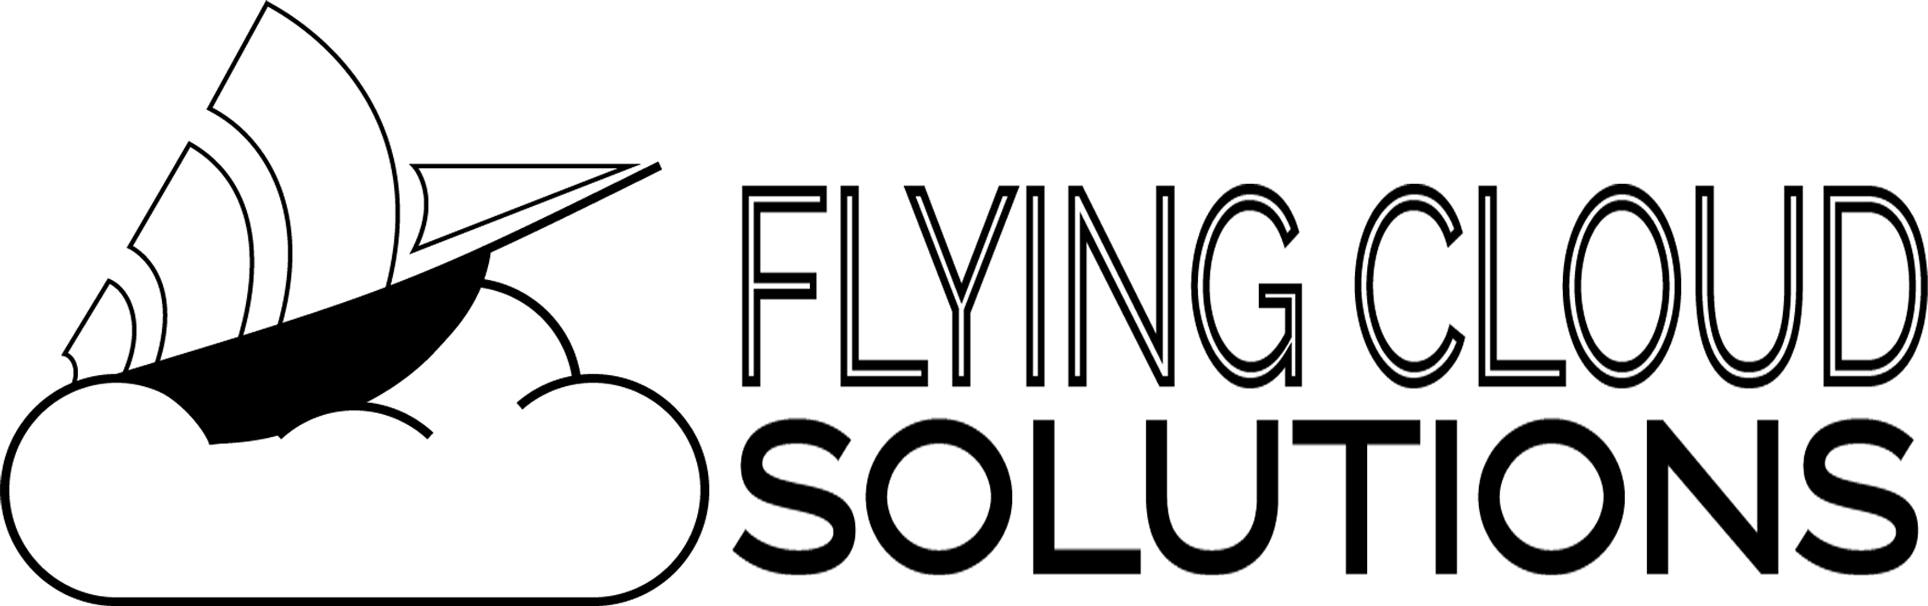 Flying Cloud Solutions